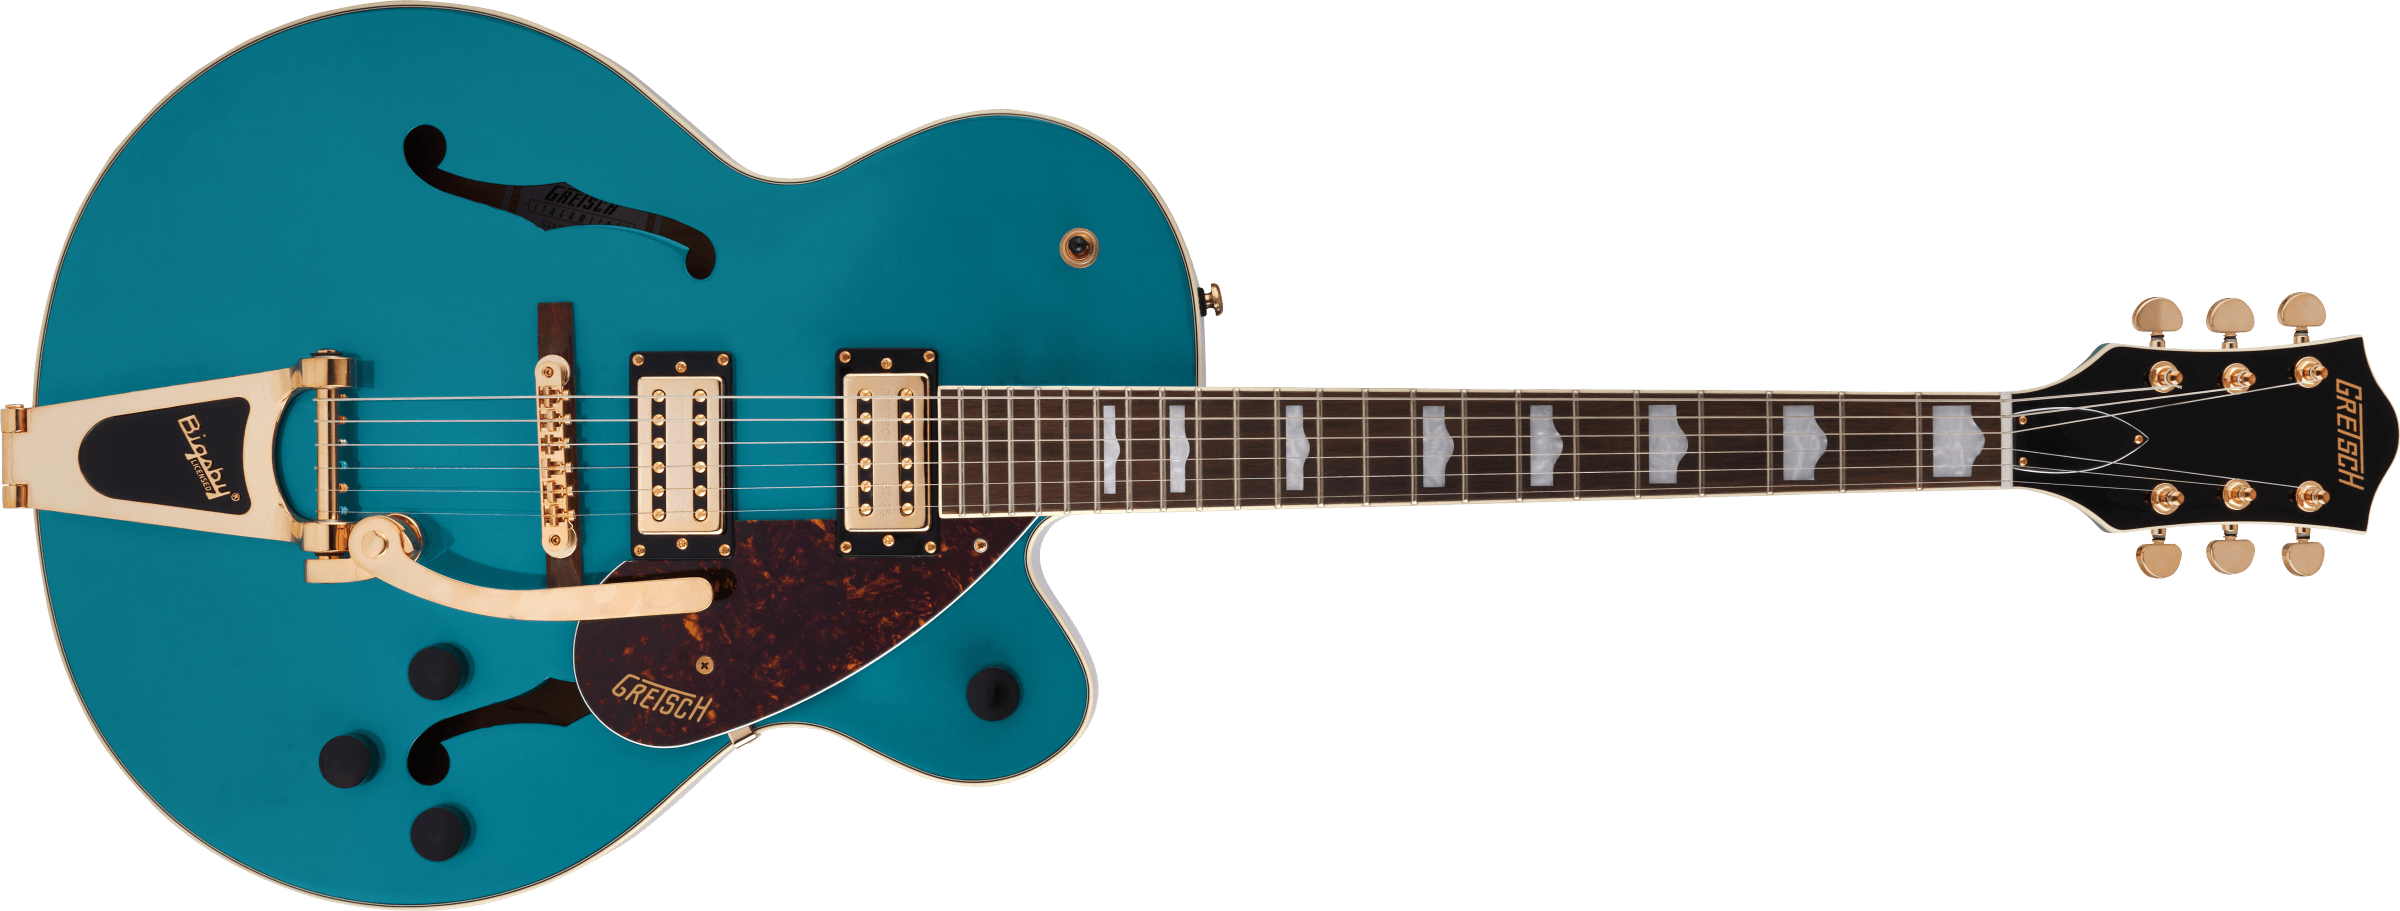 G2410TG Streamliner™ Hollow Body Single-Cut with Bigsby® and Gold Hardware, Laurel Fingerboard, Ocean Turquoise 2804800508